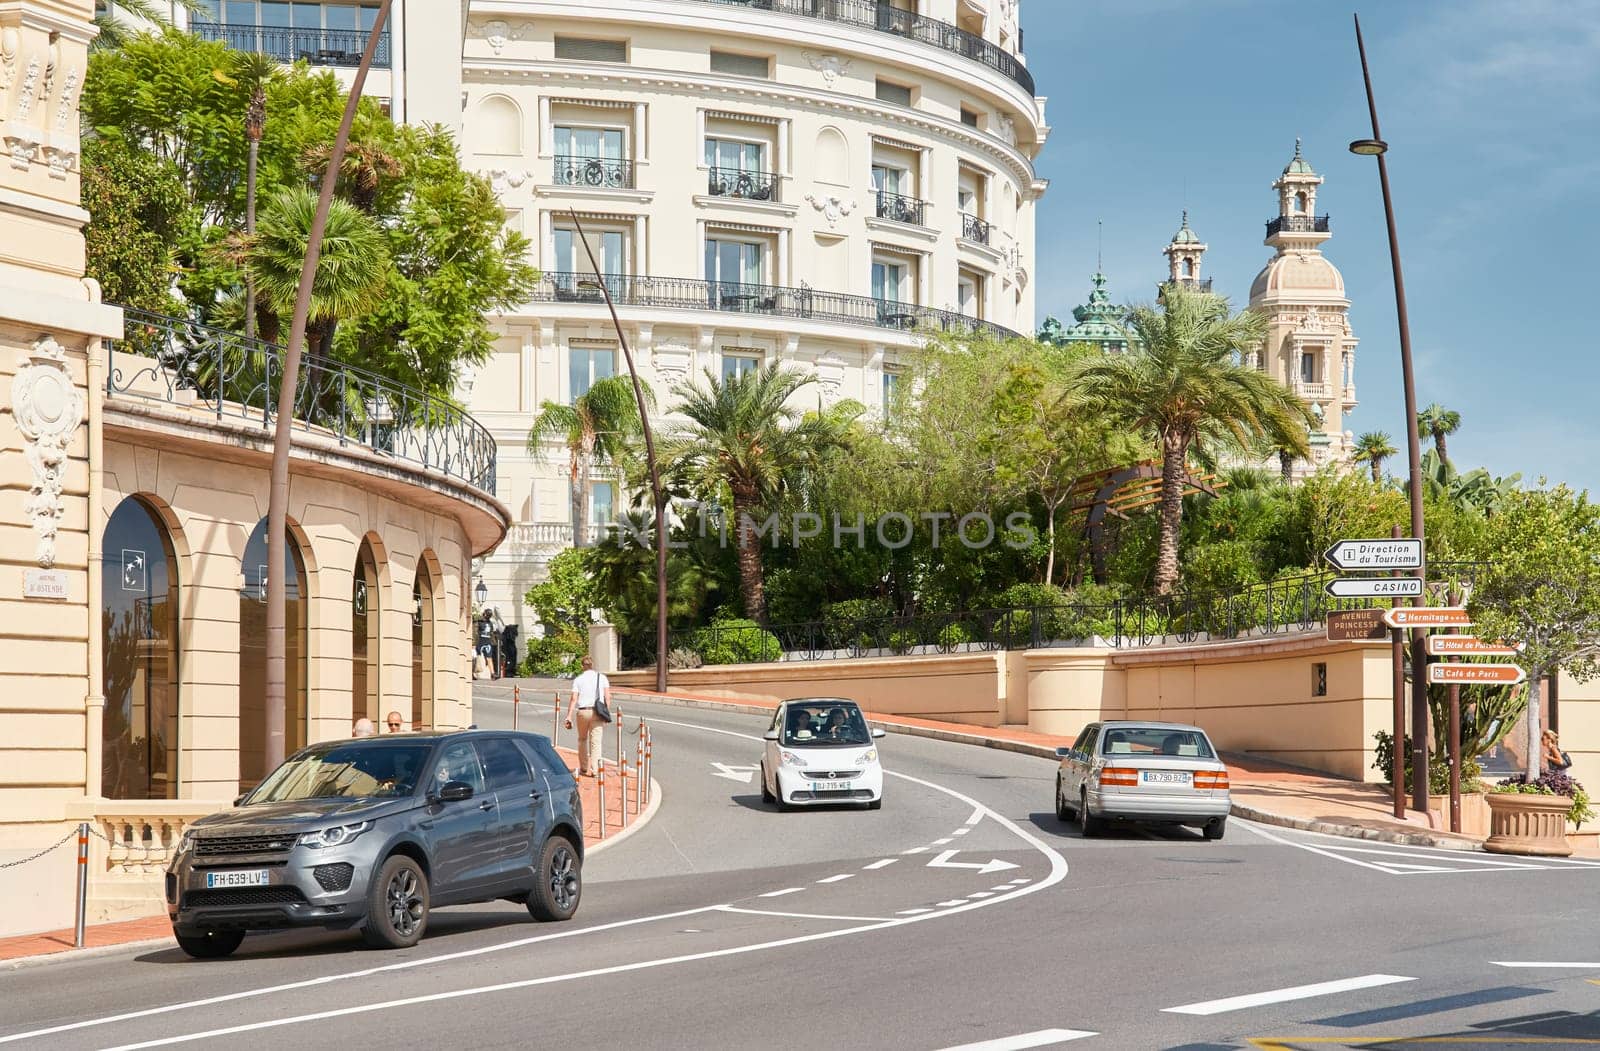 Monaco, Monte-Carlo, 29 September 2022 - Famous landmark Casino Monte-Carlo and hotel de Paris at sunny day, lifestyle of principality, wealth life, expensive luxury cars, sightseeing by vladimirdrozdin